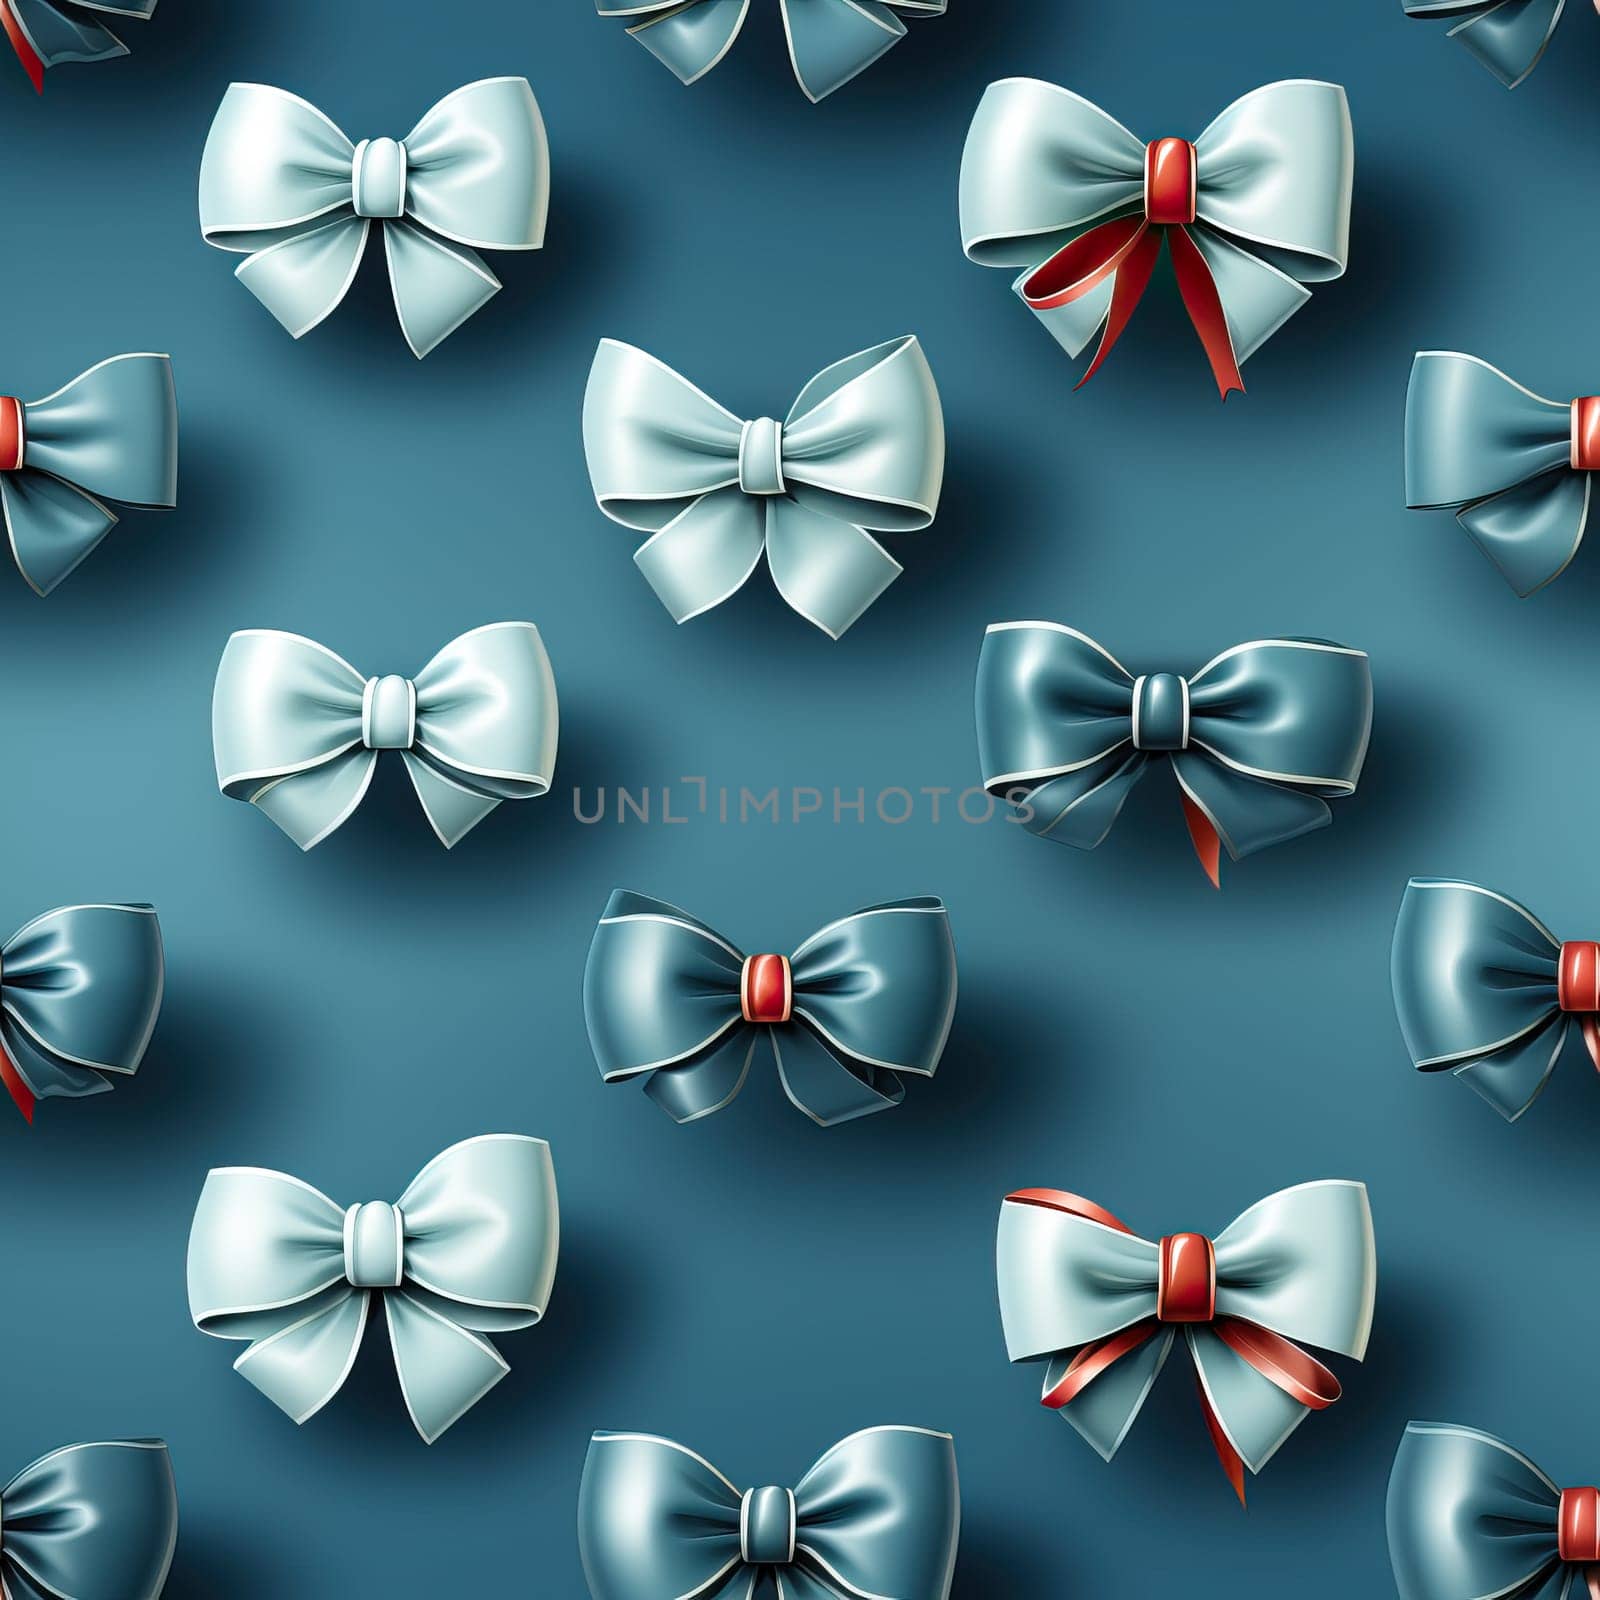 Several silver and red bows arranged on a blue surface.